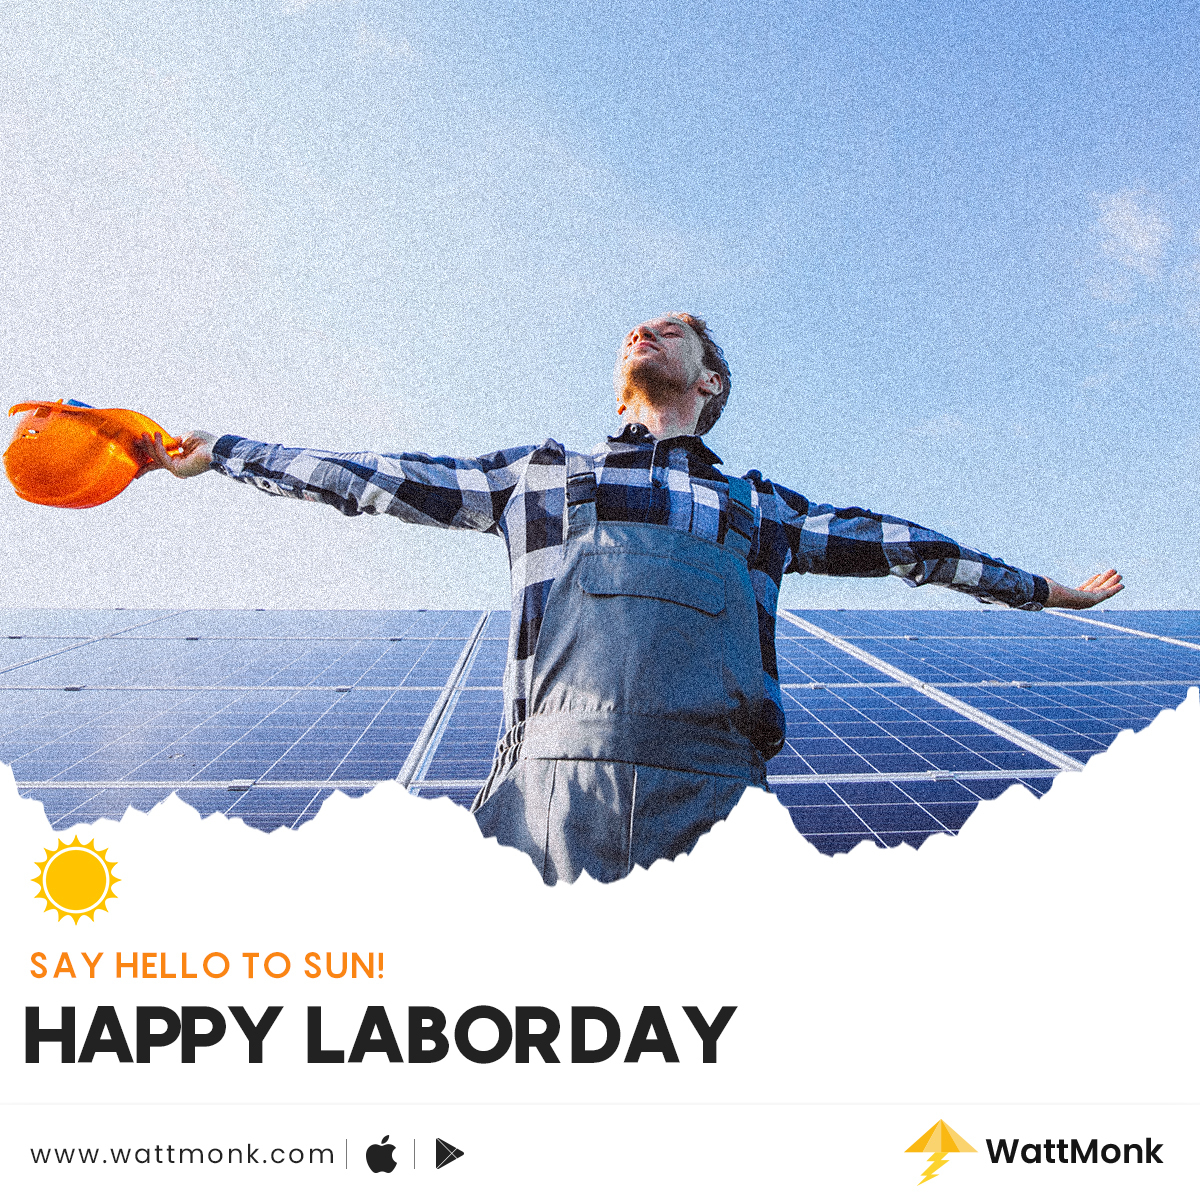 Say Hello to #SUN
Wattmonk wishes you a Happy Labor Day
Wattmonk.com Or Call (973) 609-9241
#happylaborday #happylabordayweekend #happylabourday #pvpanels #design #architect  #rendering #architectural #usasolar #renewableenergy #solarpanels #solarpower #cleanenergy